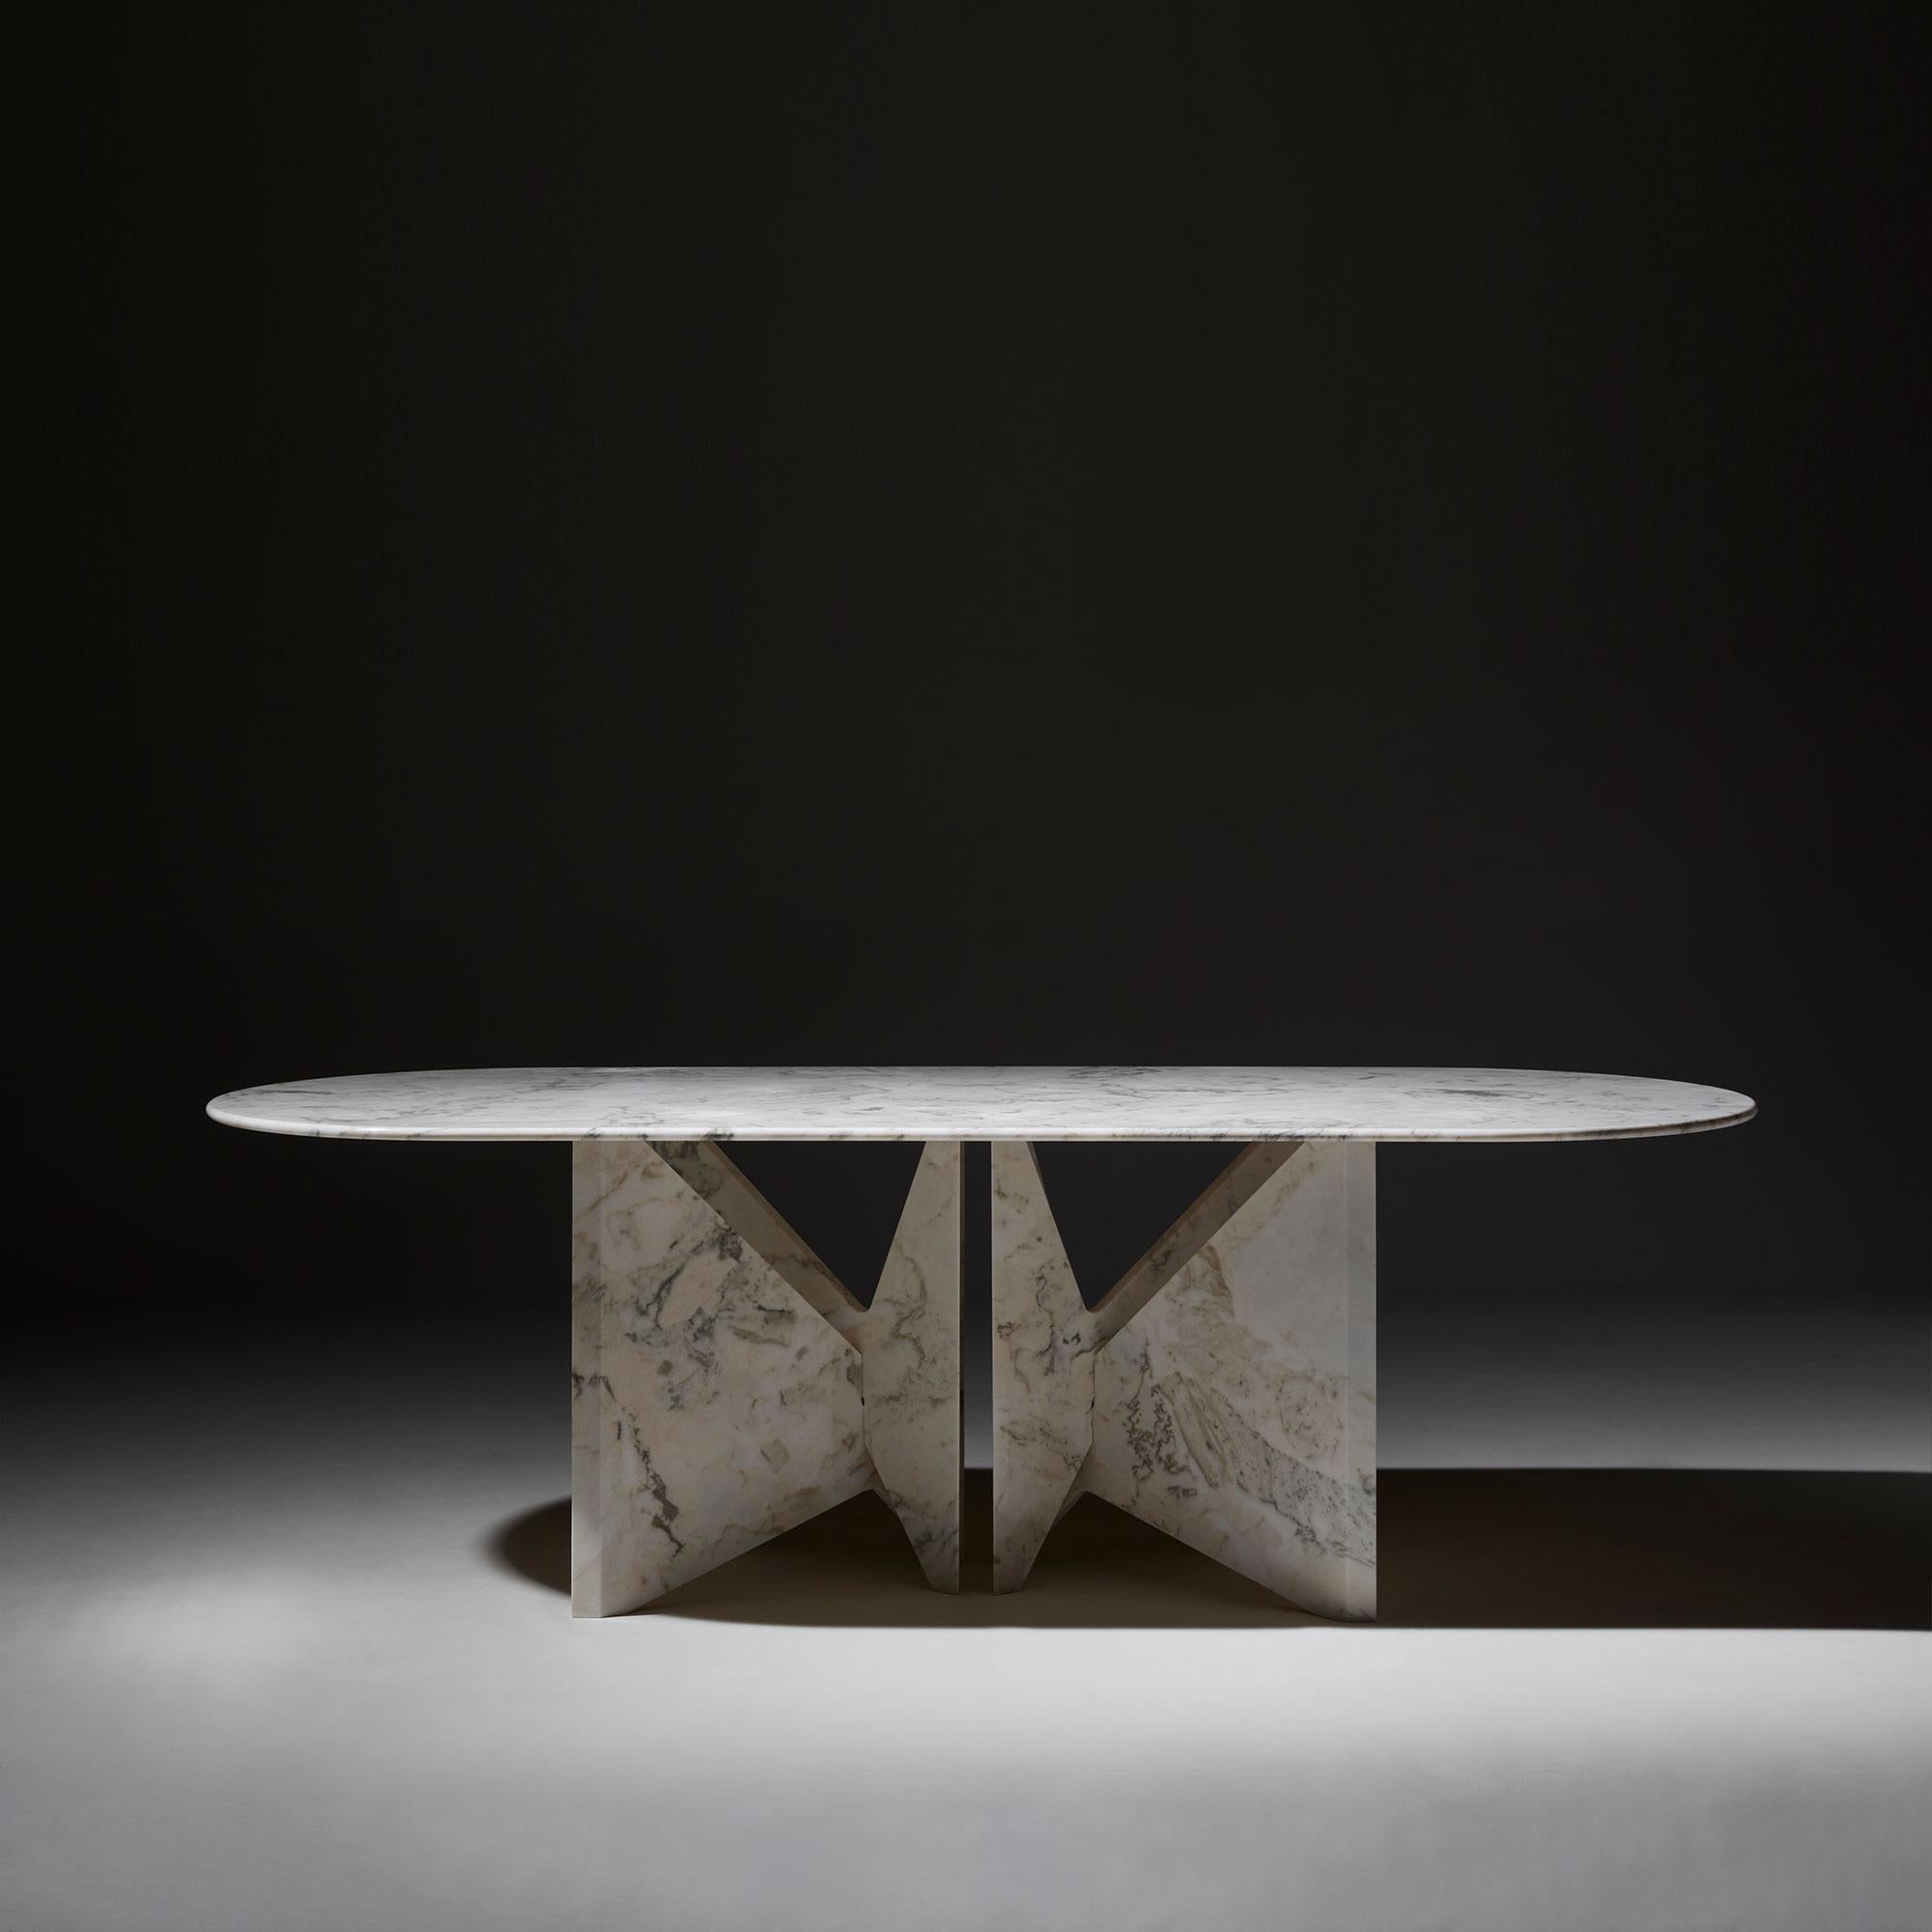 Lamina marble dining table, Hannes Peer
Dimensions: 110 W x 250 D x 76.5 H cm
Materials: Veined Estremoz Marble

Lamina is a dinner table relying on the intersection of marble slabs. The interlocking triangle shaped legs give it both a sense of